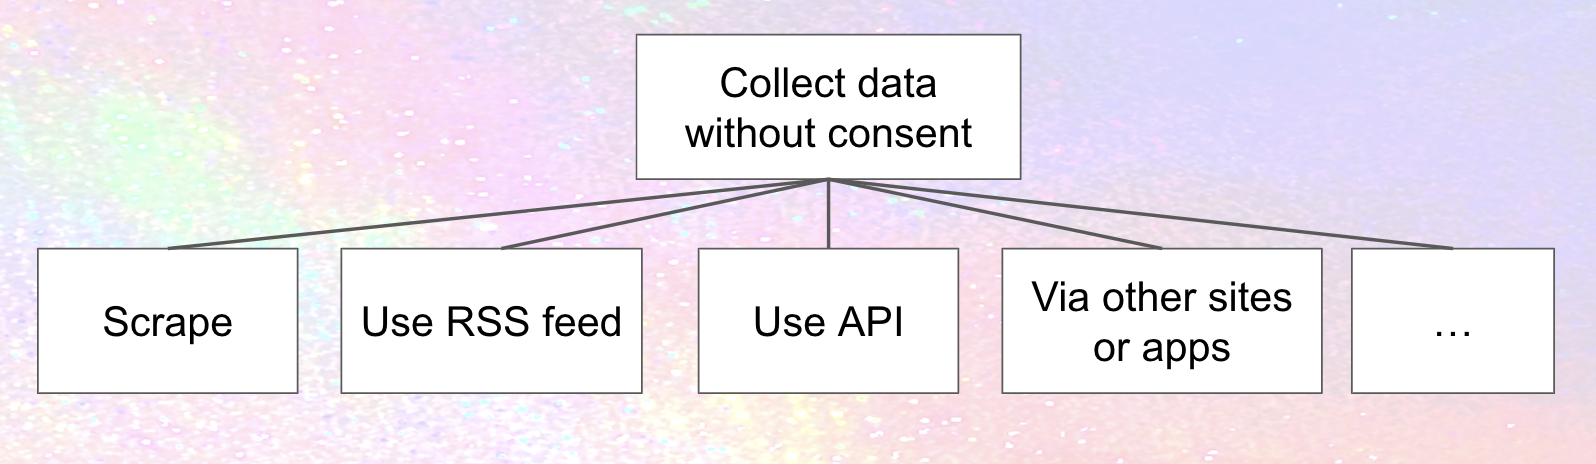 Different ways collect data without consent, described in the article's text